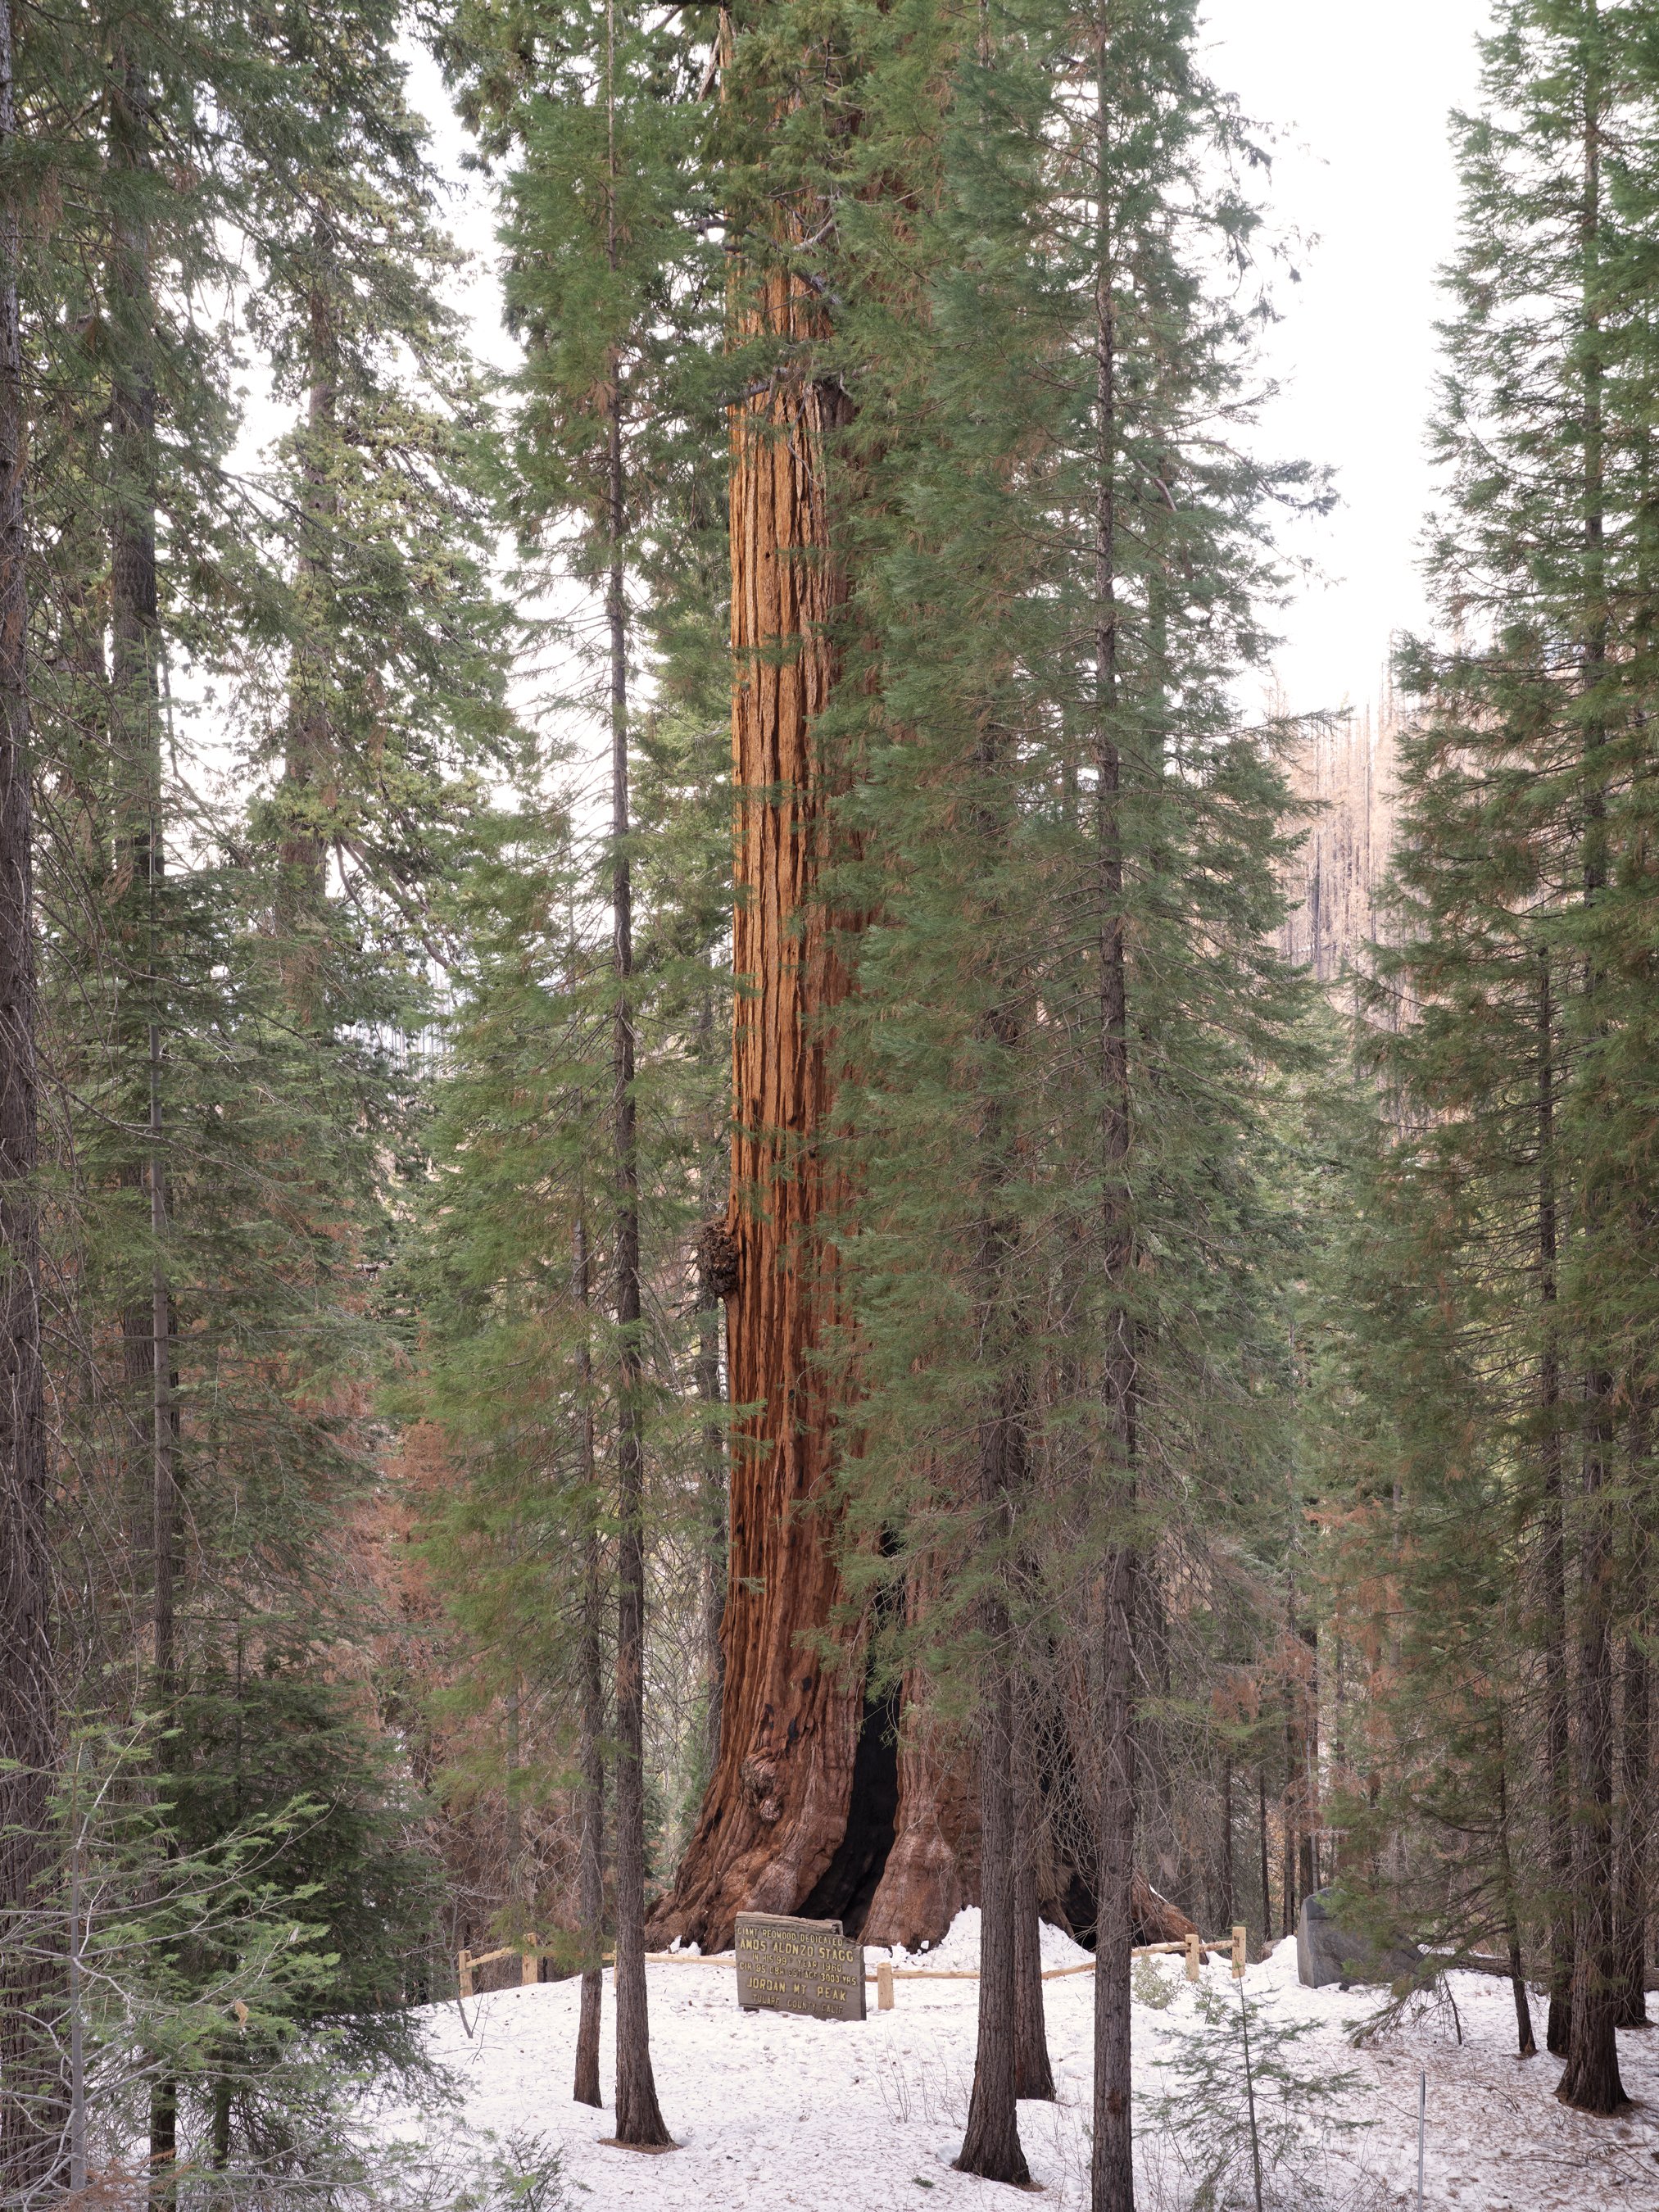 gathering_growth_foundation_stagg_tree_giant_sequoia_brian_kelley_02-2022_01.jpg